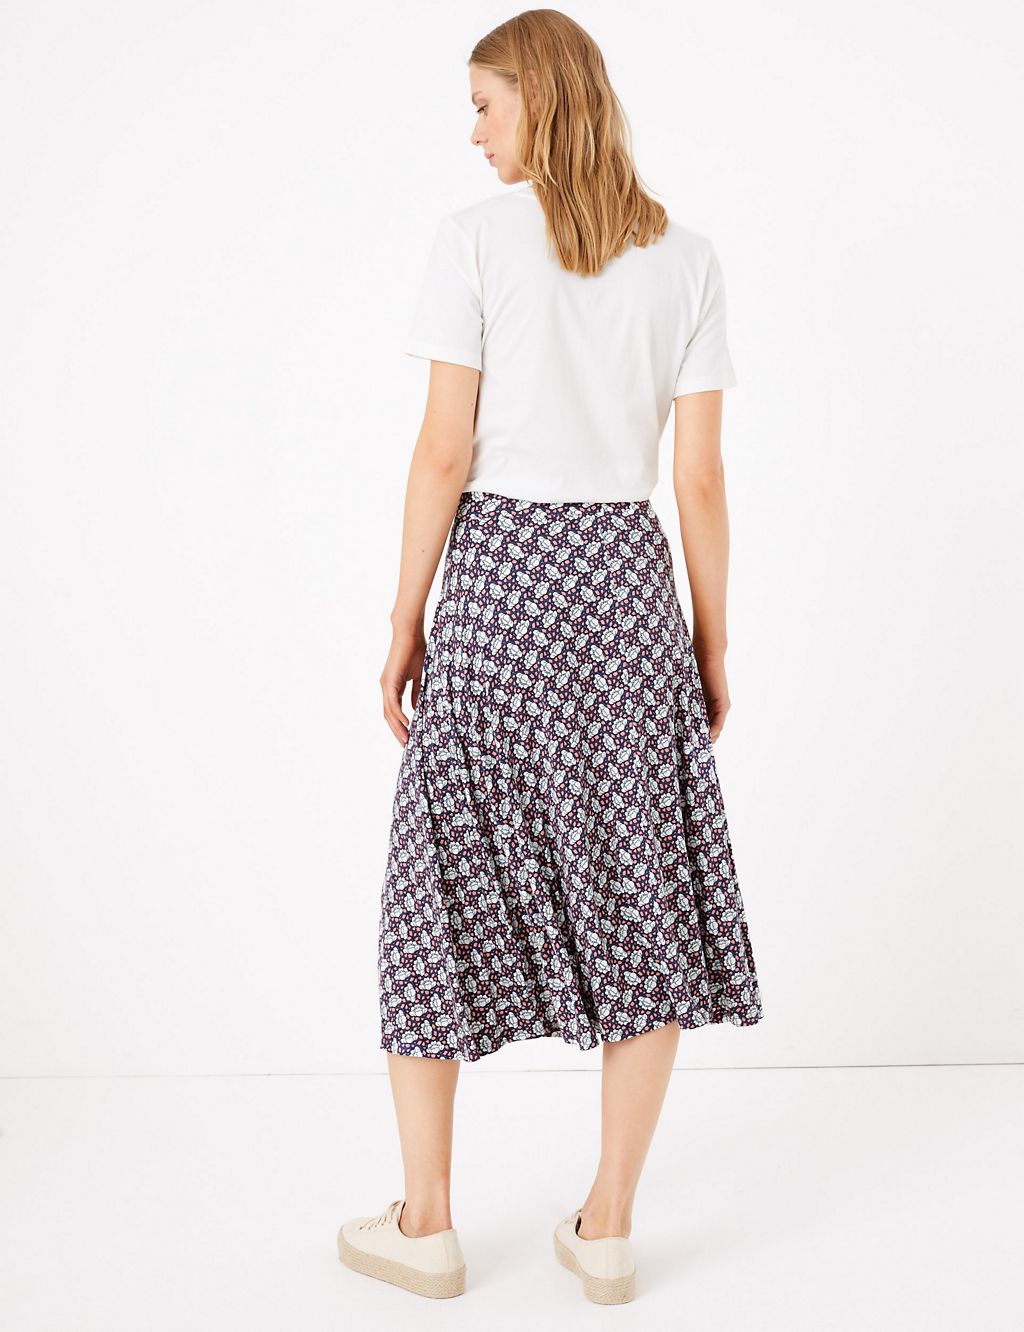 Jersey Floral A-Line Skirt | M&S Collection | M&S